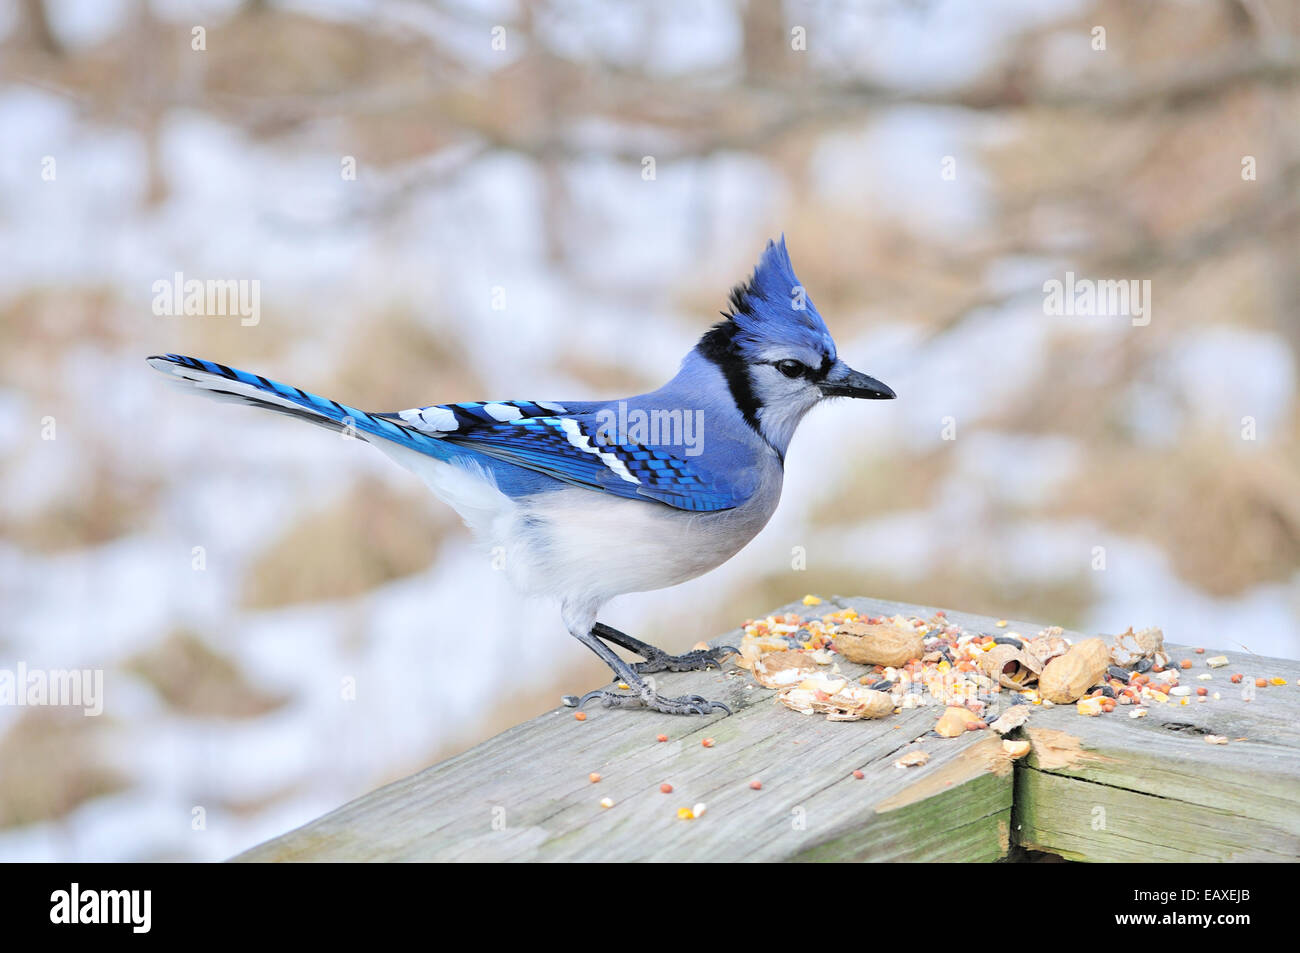 A blue jay perched on wooden rail. Stock Photo